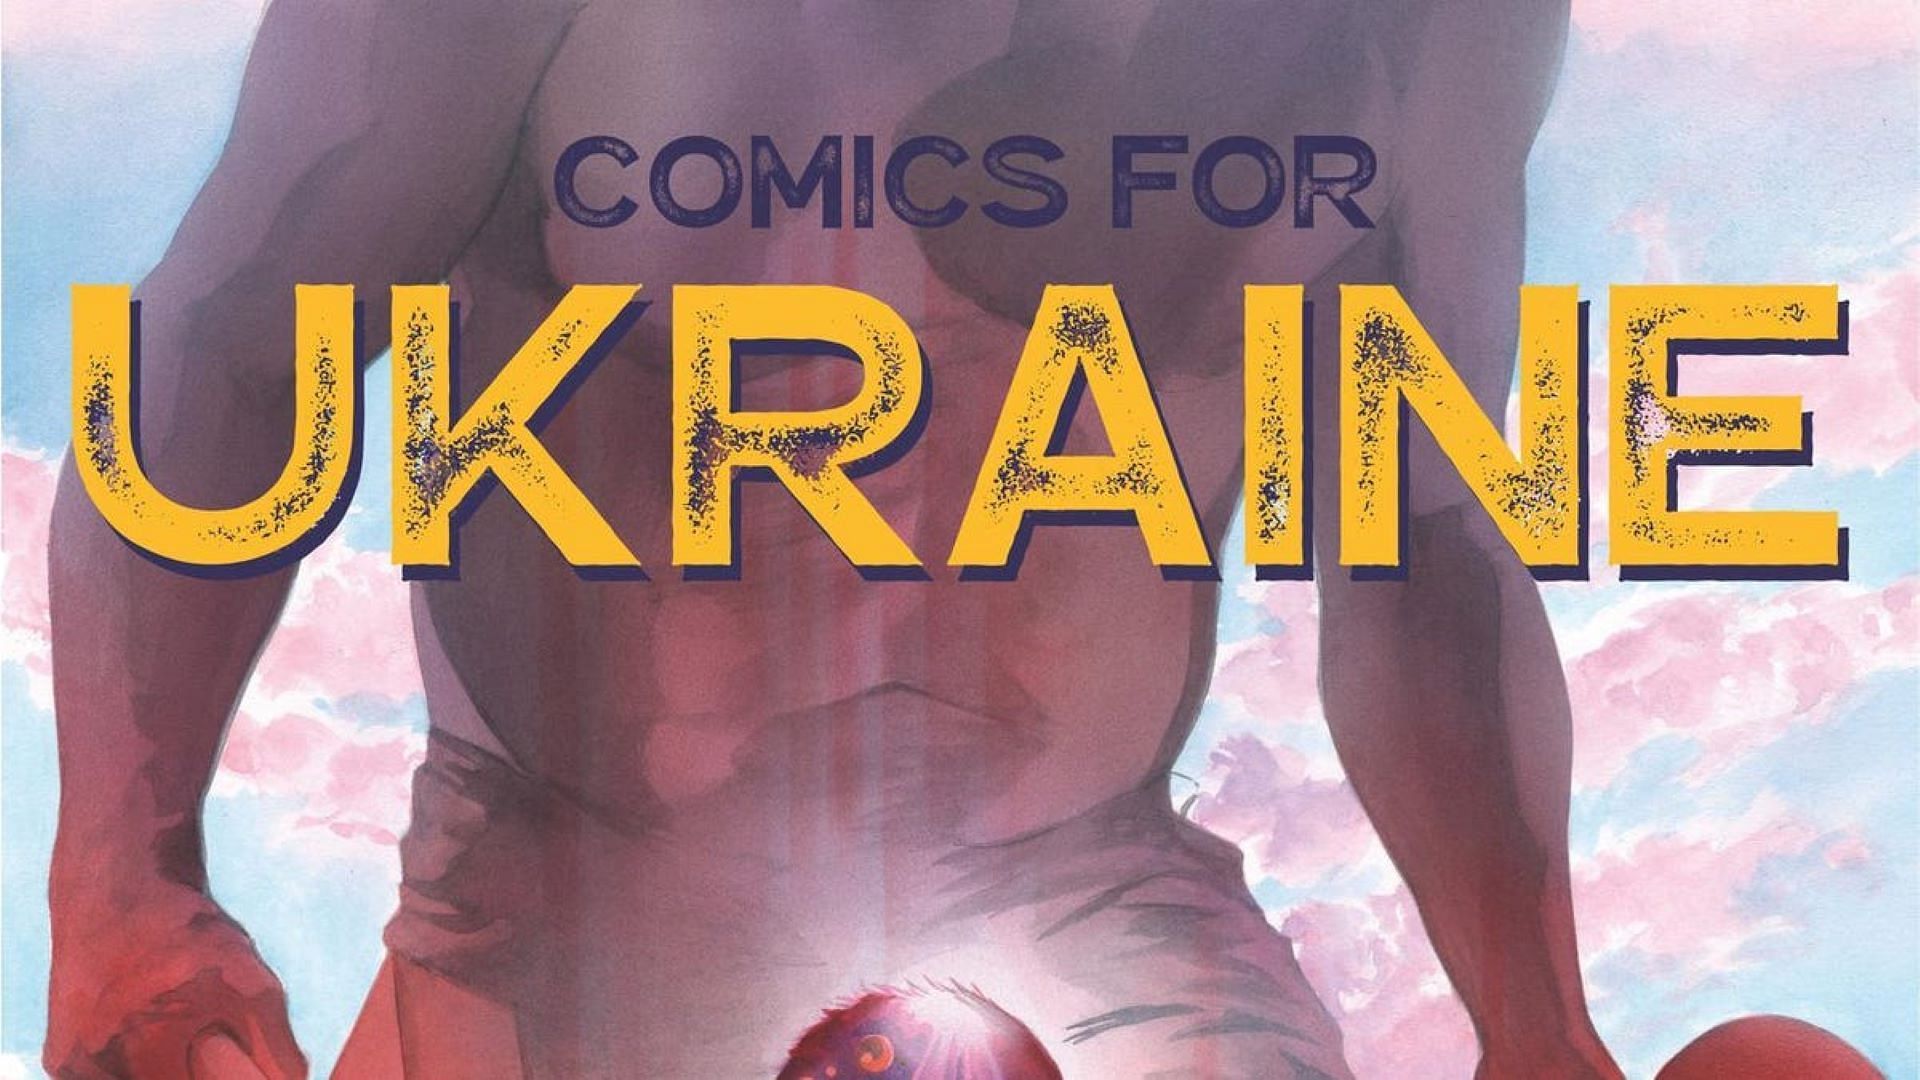 A fundraising comic for Ukraine has been launched by the famed comic book creators (Image via Kurt Busiek/ Twitter)